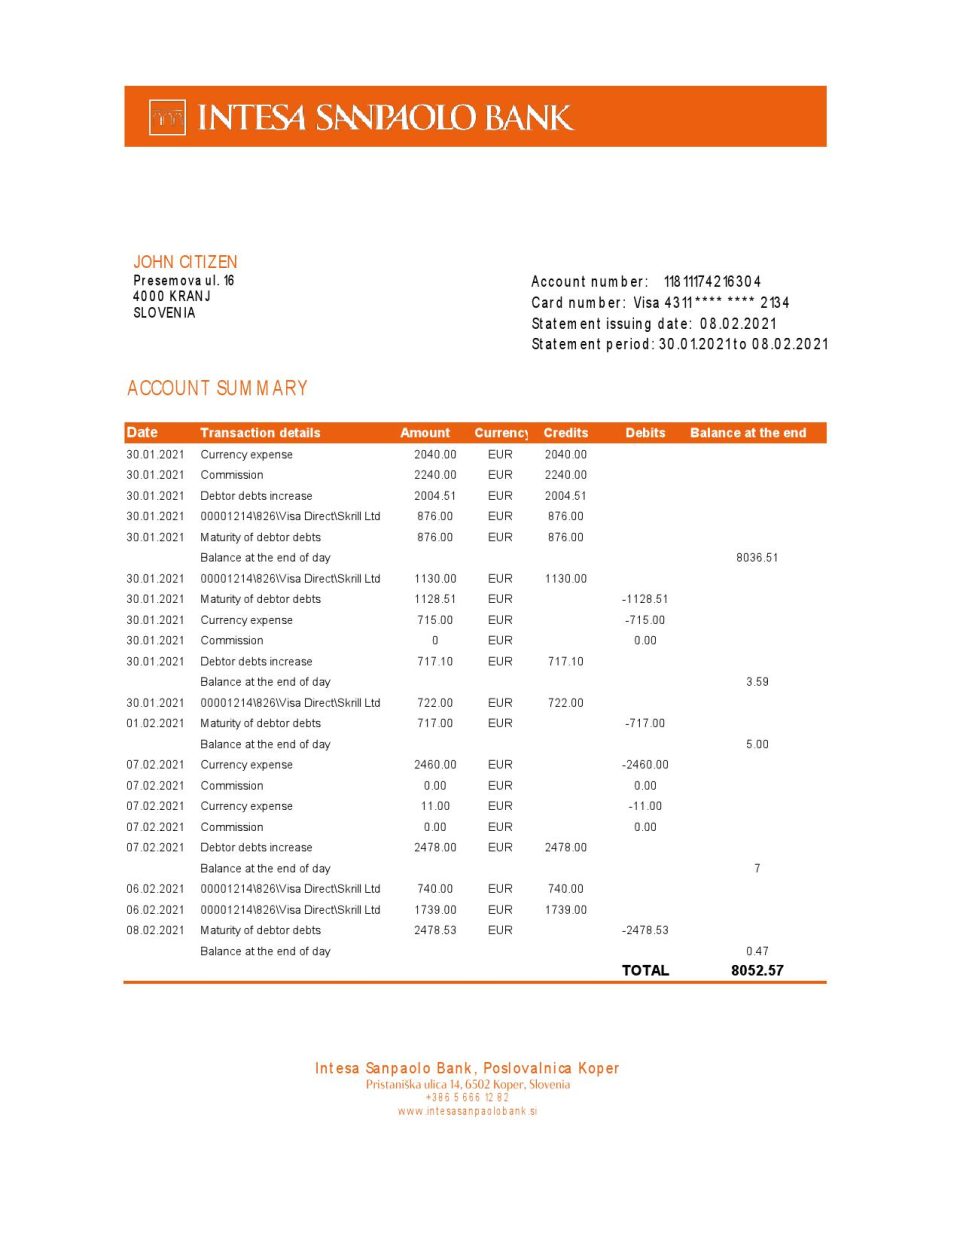 Slovenia Intesa Sanpaolo Bank, Poslovalnica Koper bank statement easy to fill template in .xls and .pdf file format